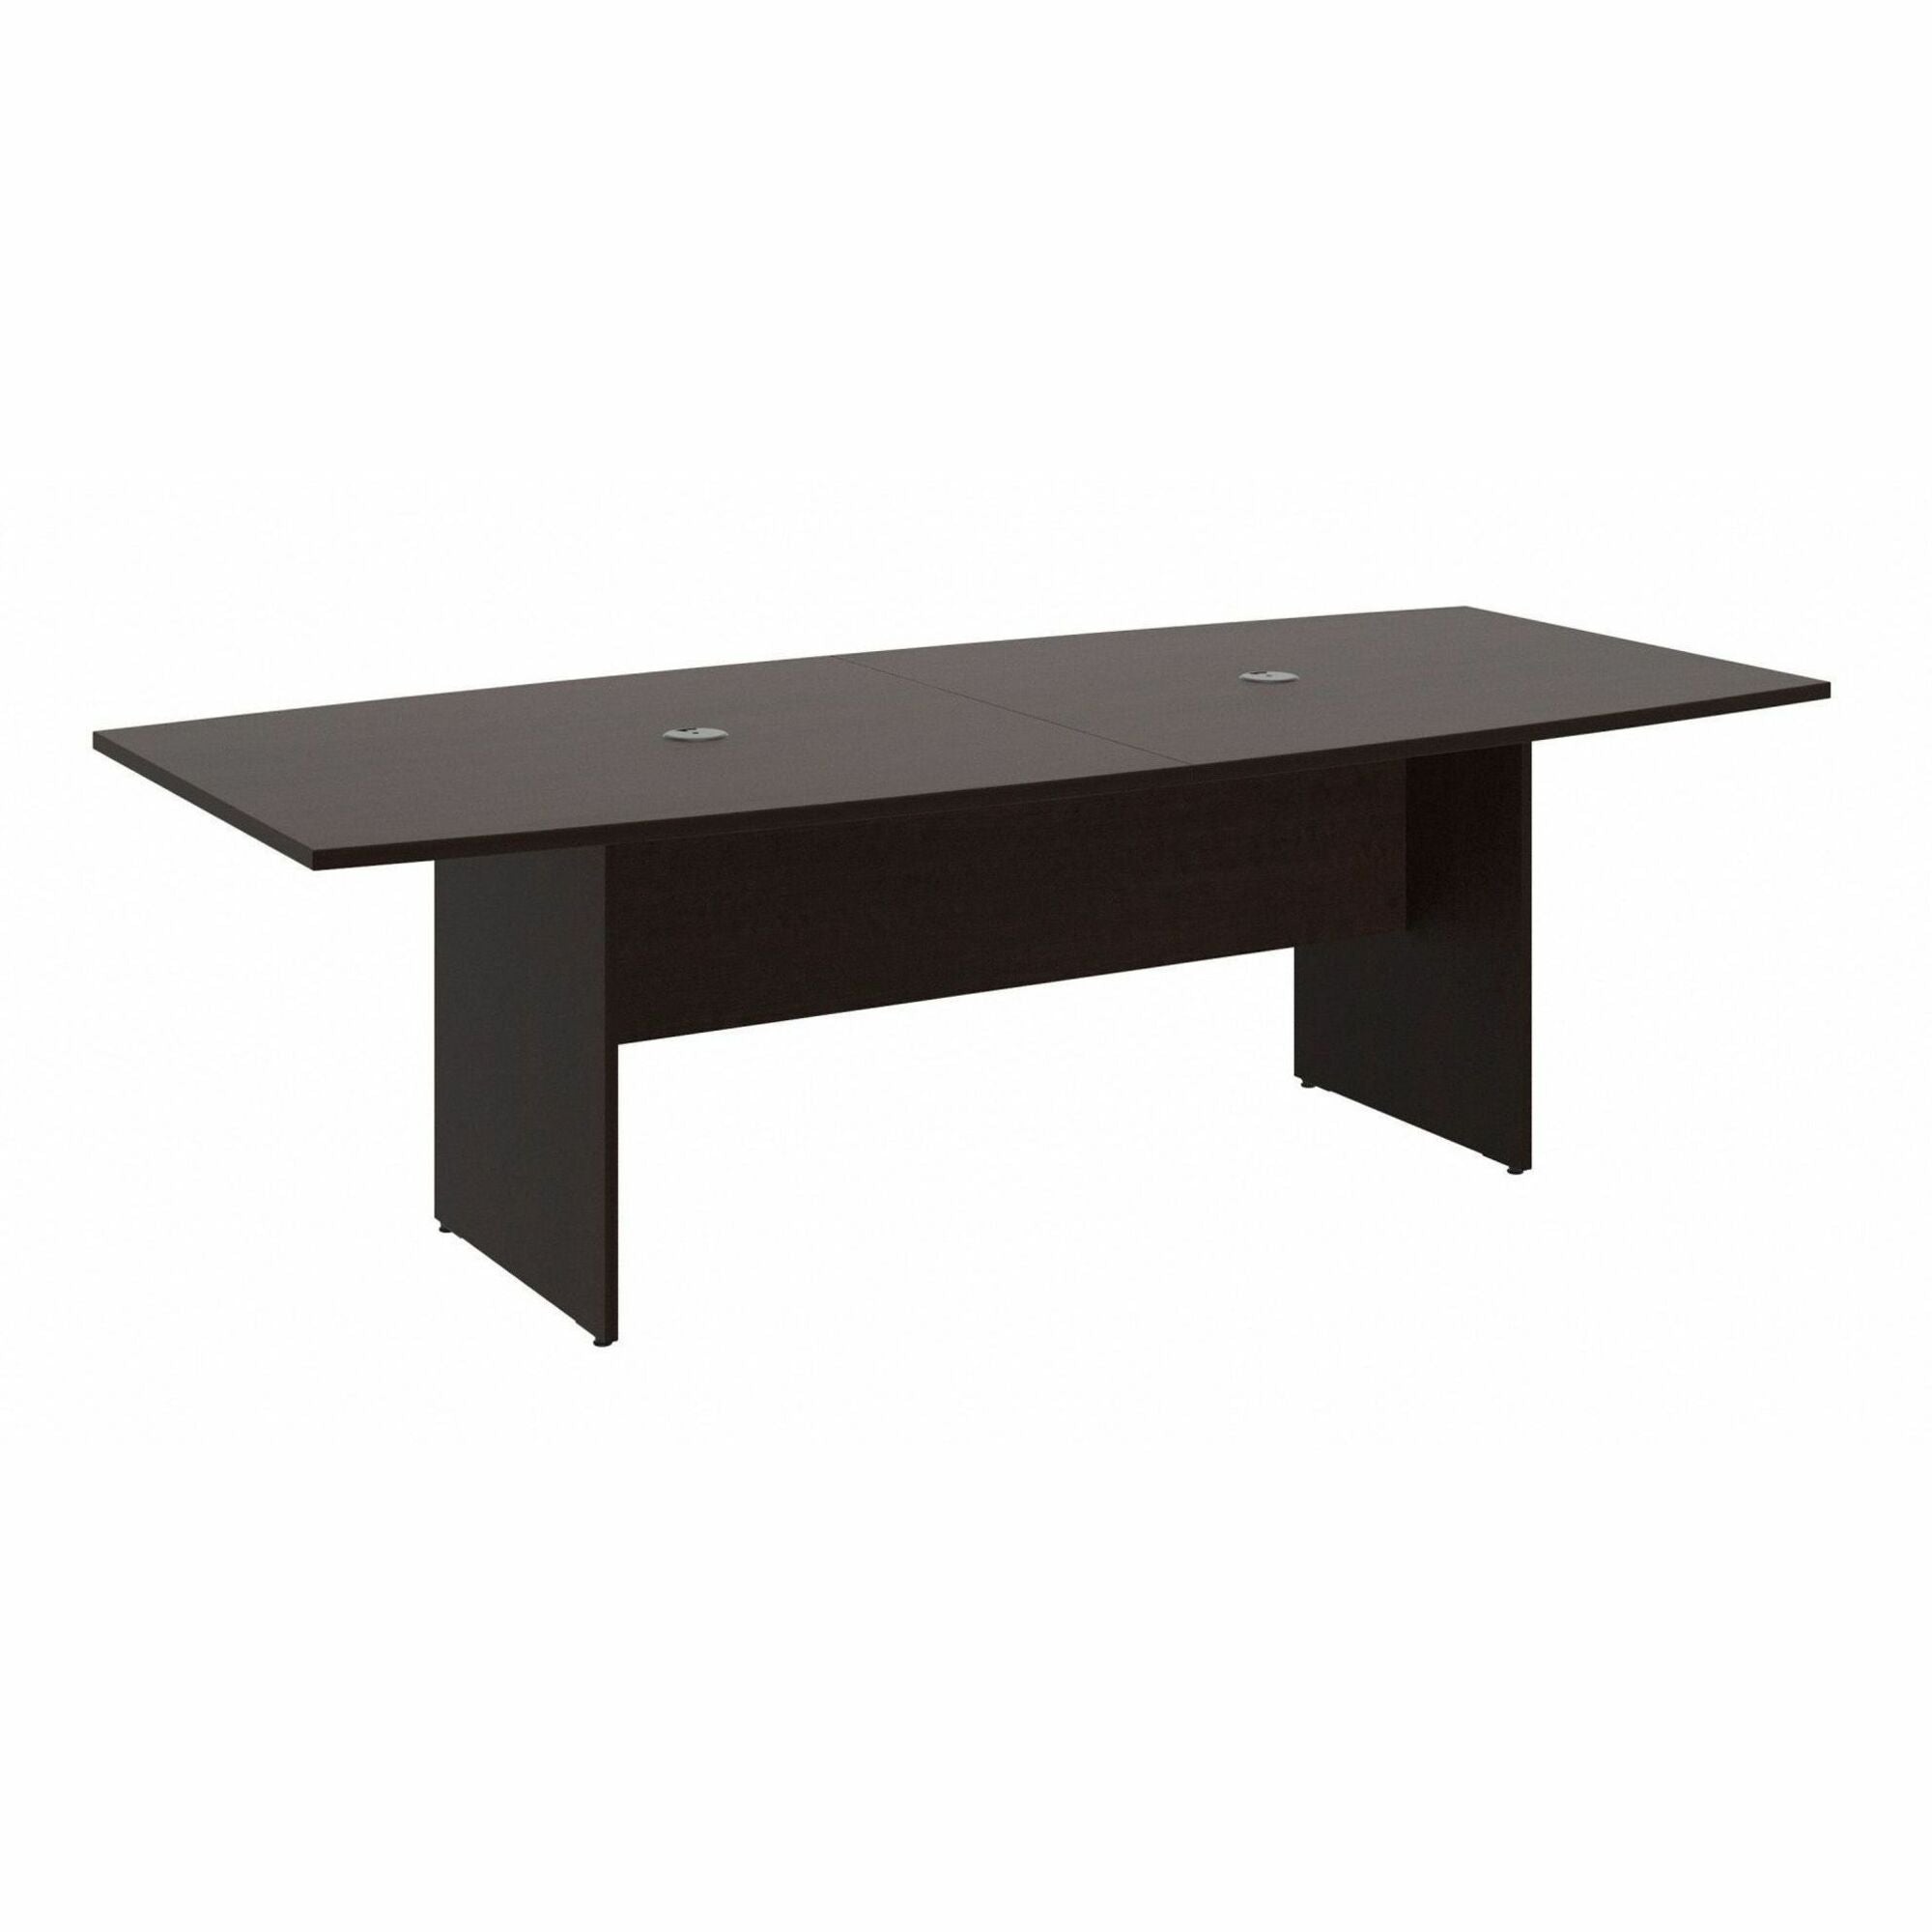 Bush Business Furniture Boat Top Conference Table - For - Table TopBoat Top x 42.01" Table Top Width x 95.20" Table Top Depth x 1" Table Top Thickness - 28.65" Height - Assembly Required - Mocha Cherry, Thermofused Laminate (TFL) - 1 Each - 1